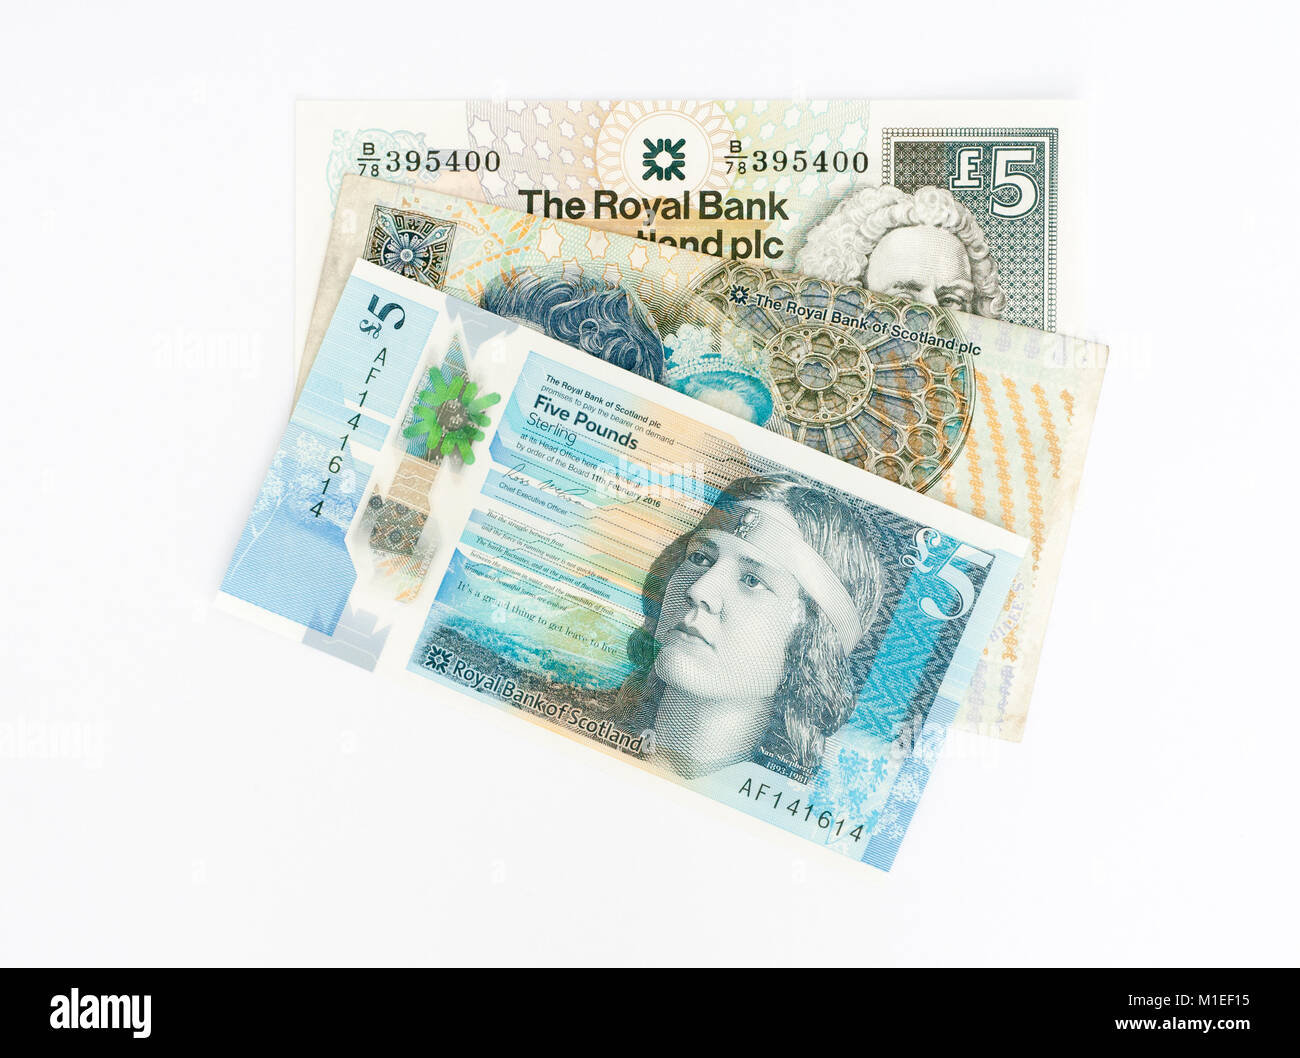 Royal Bank Of Scotland Partners With De La Rue For Launch Of 20